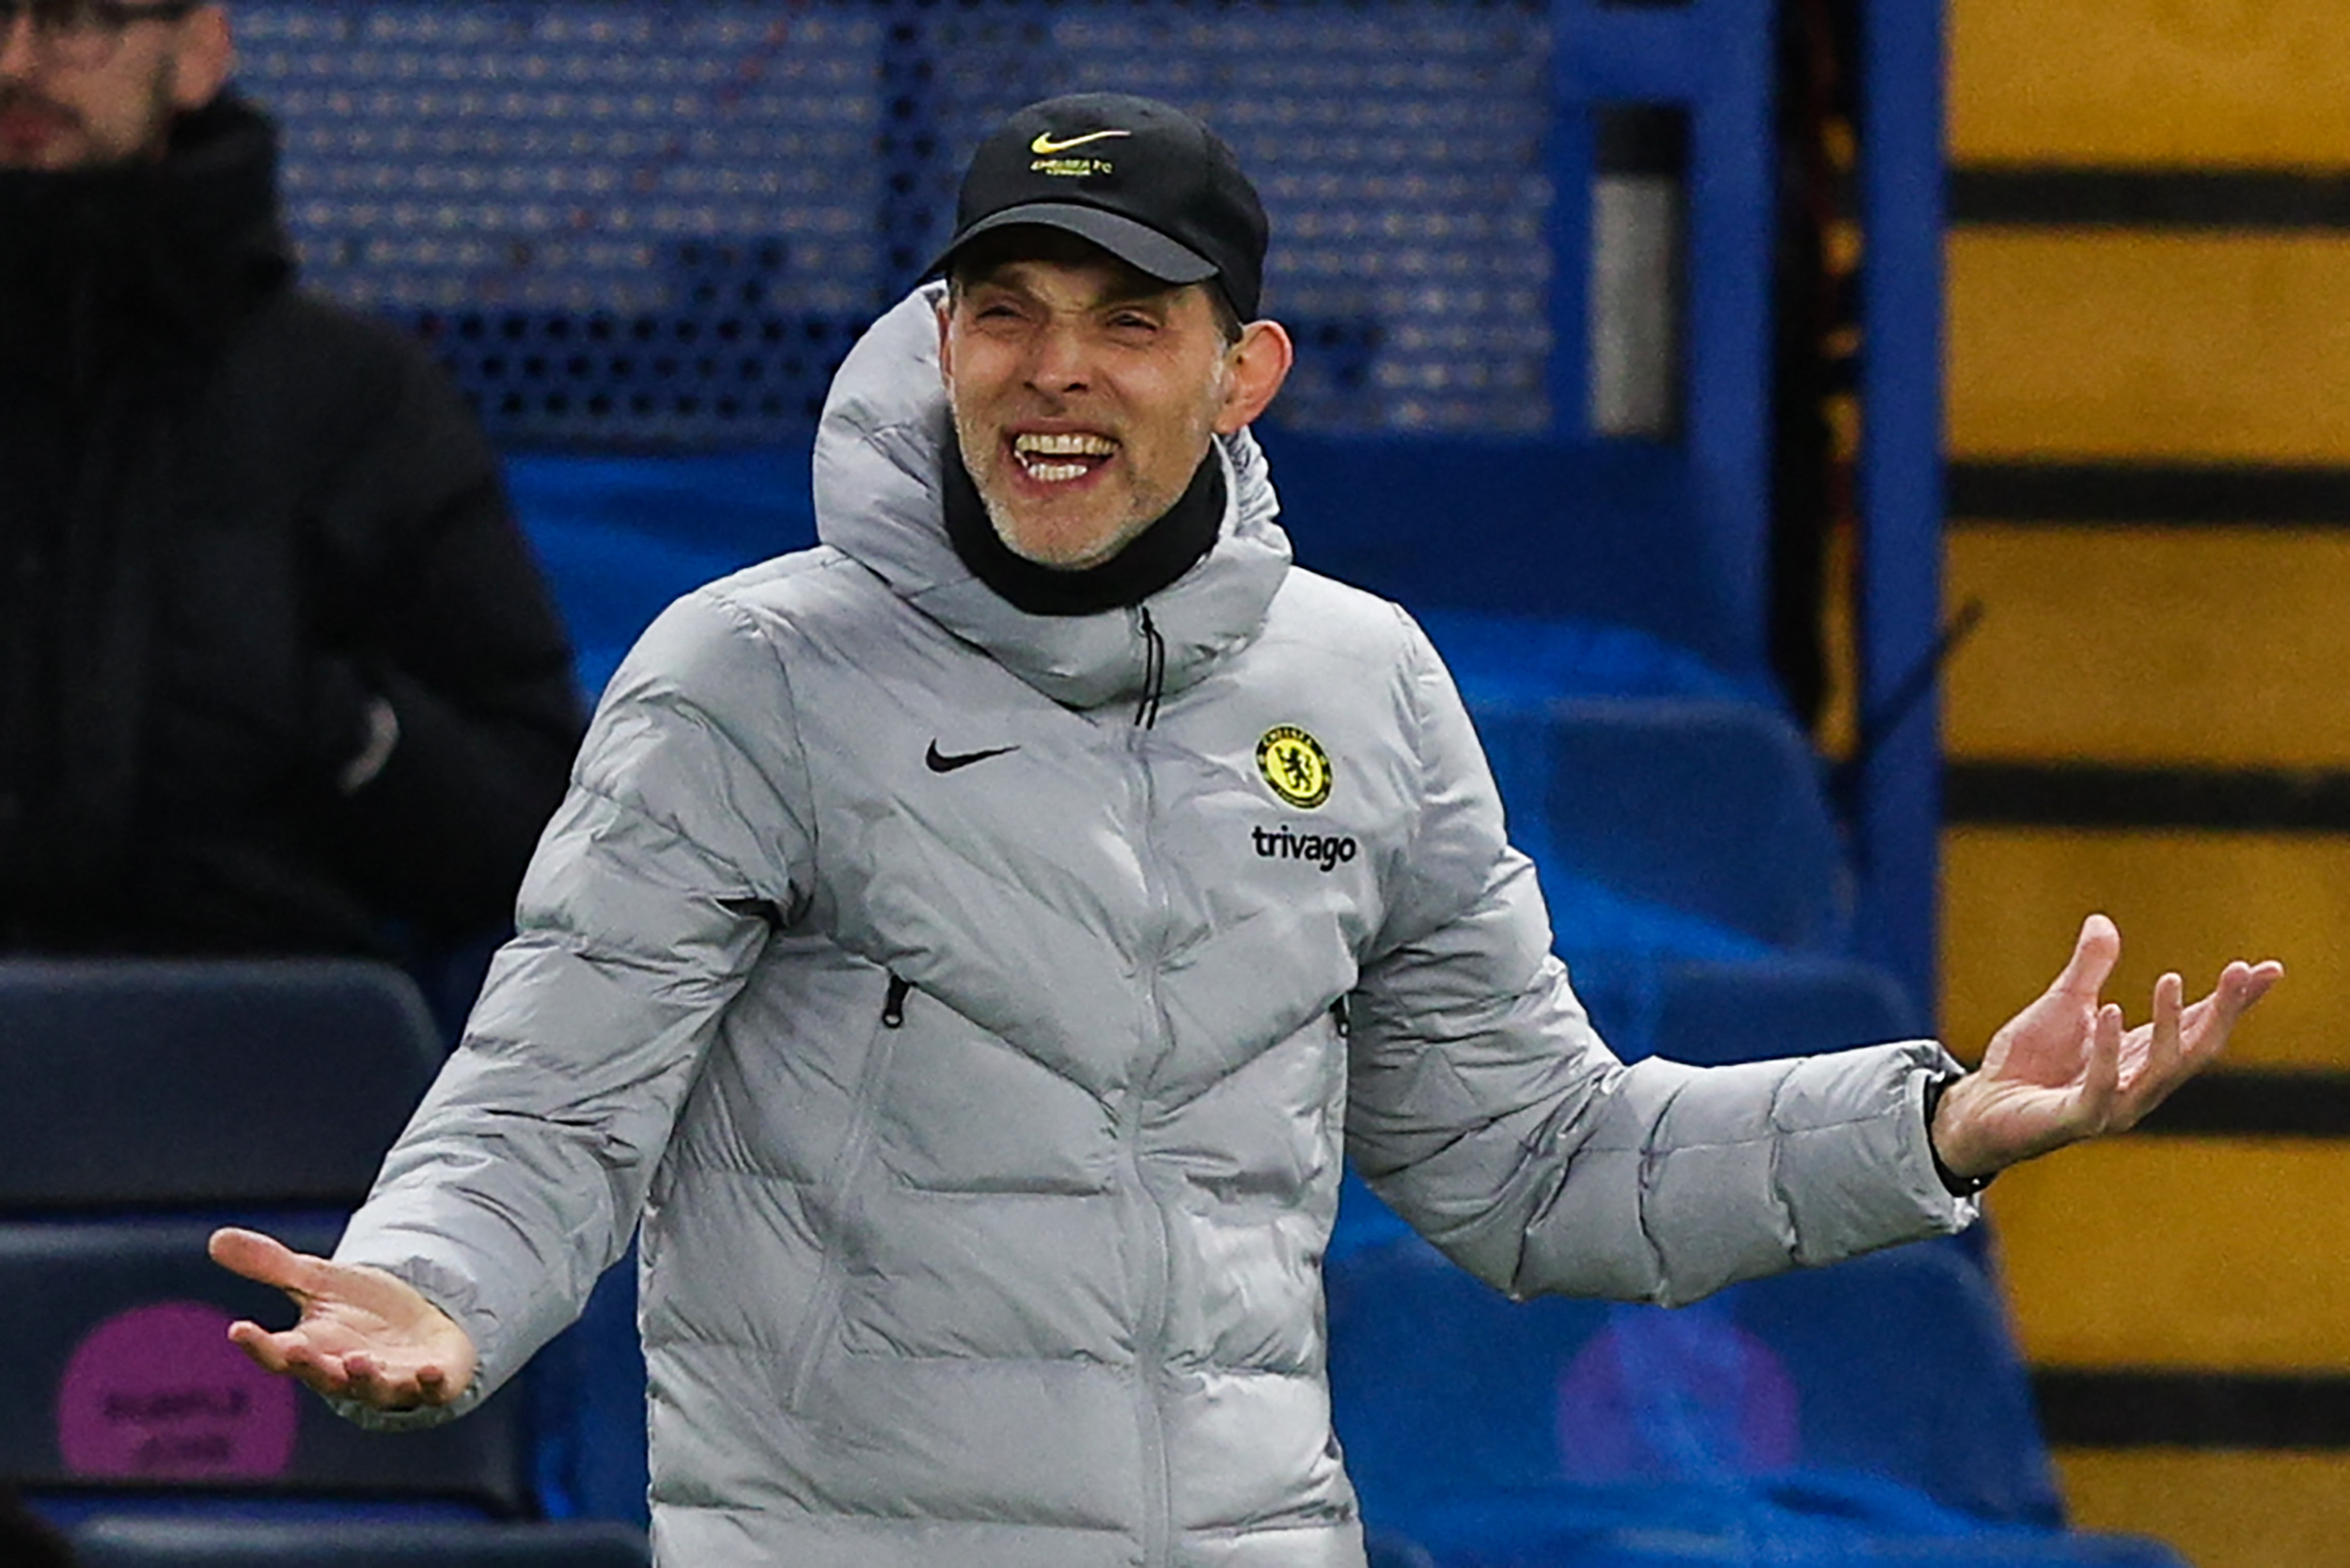 Chelsea players were sick of Thomas Tuchel and his antics on the sideline.